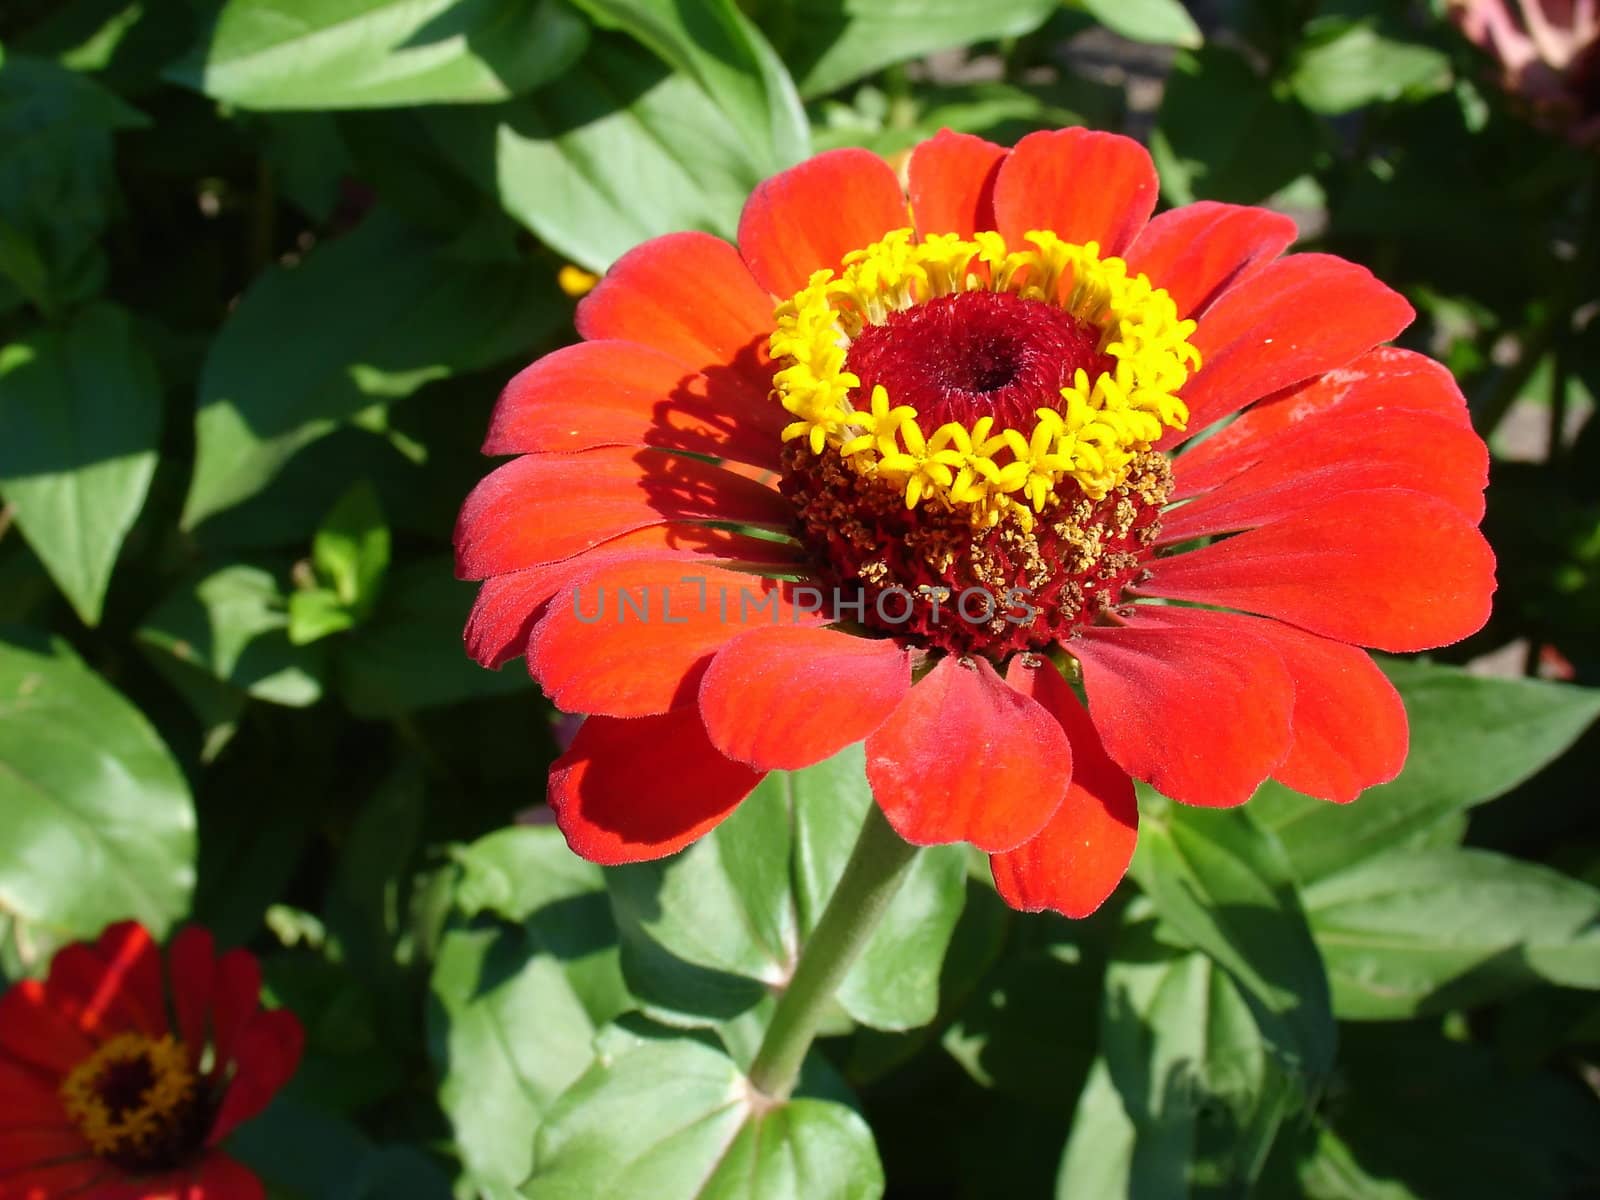 Unusual red flower with yellow round center